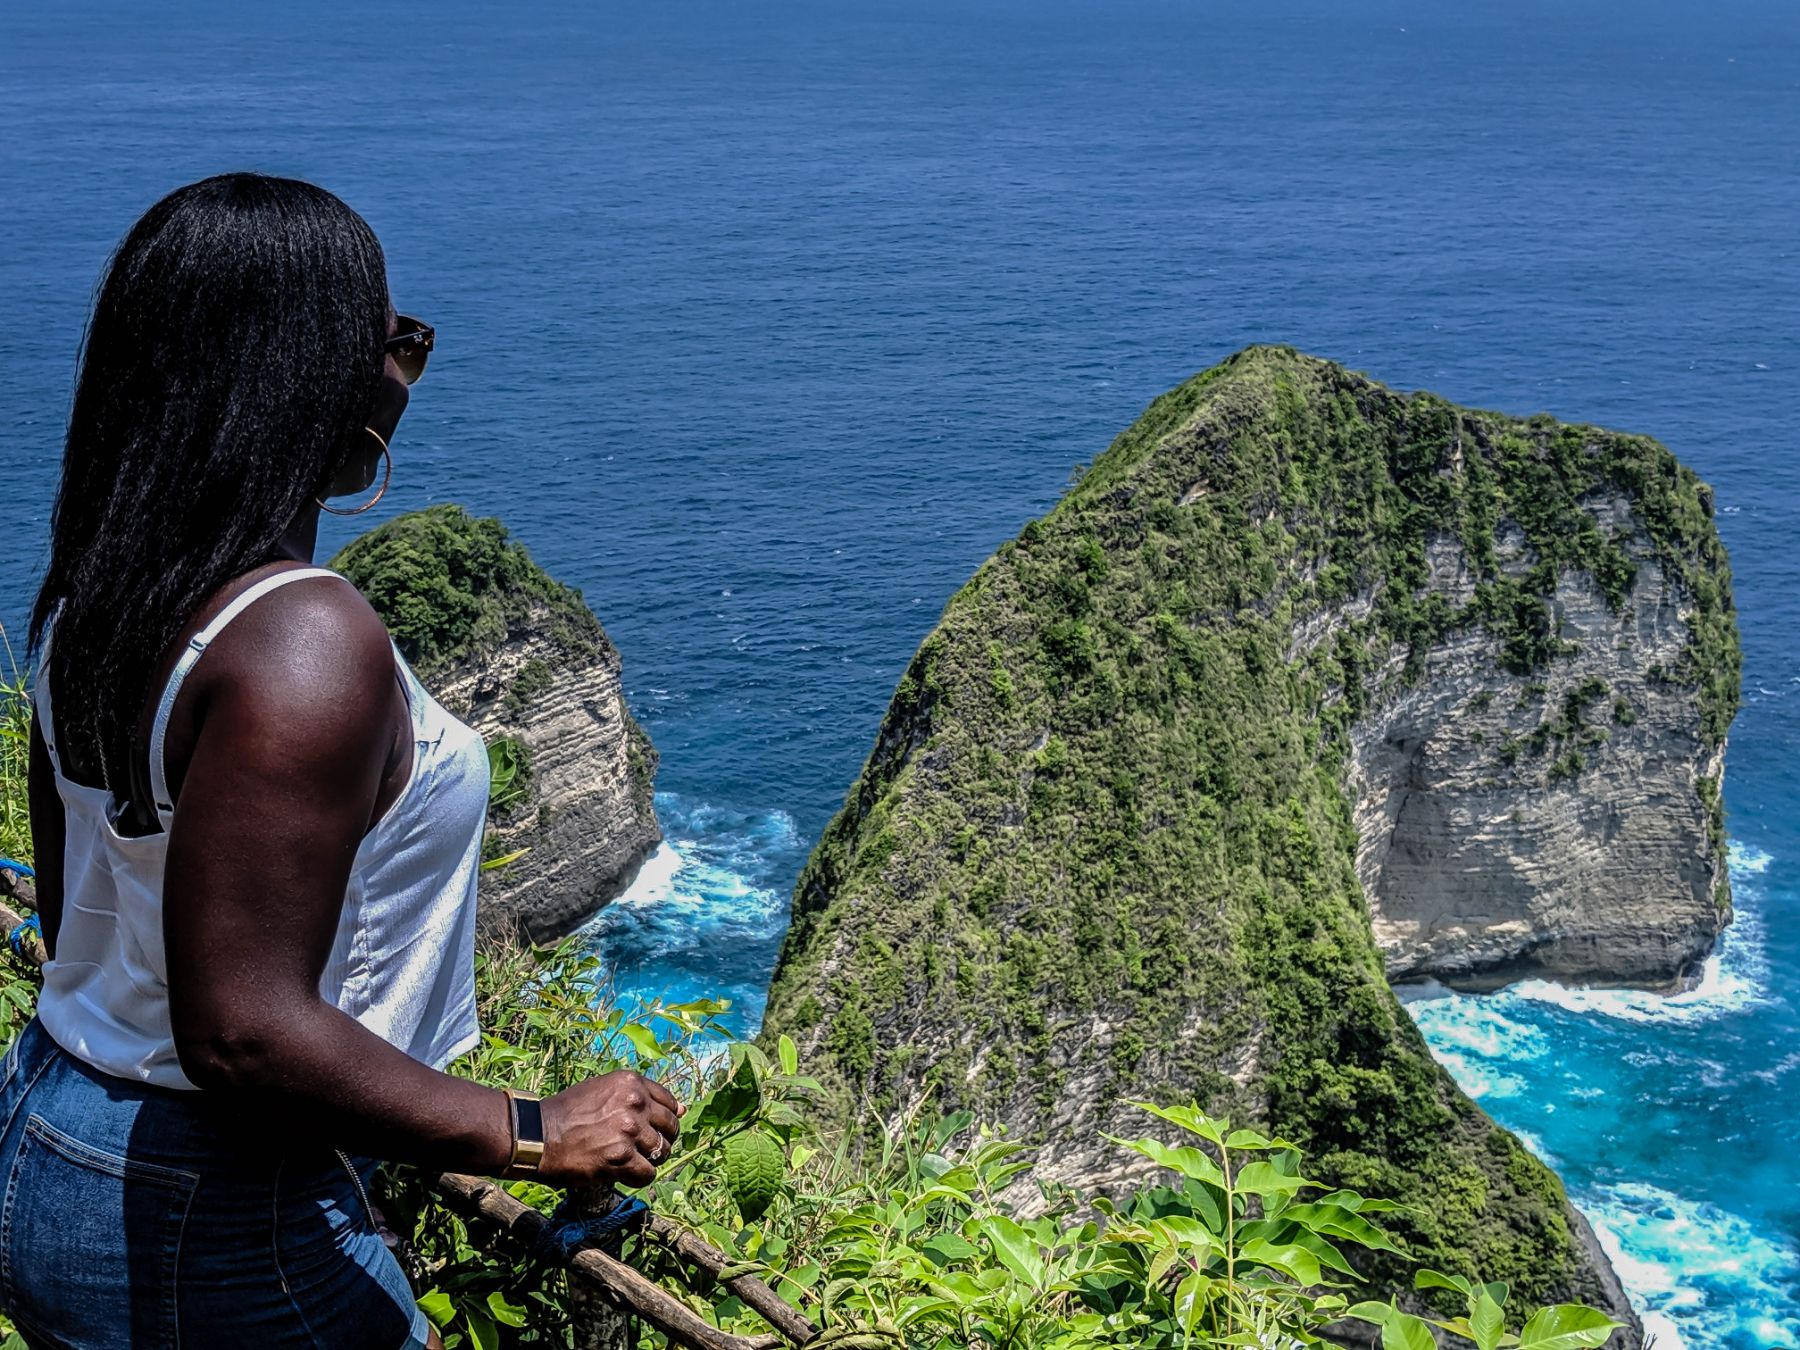 Basking in the beauty of Nusa Penida and pinching myself to make sure I'm not dreaming